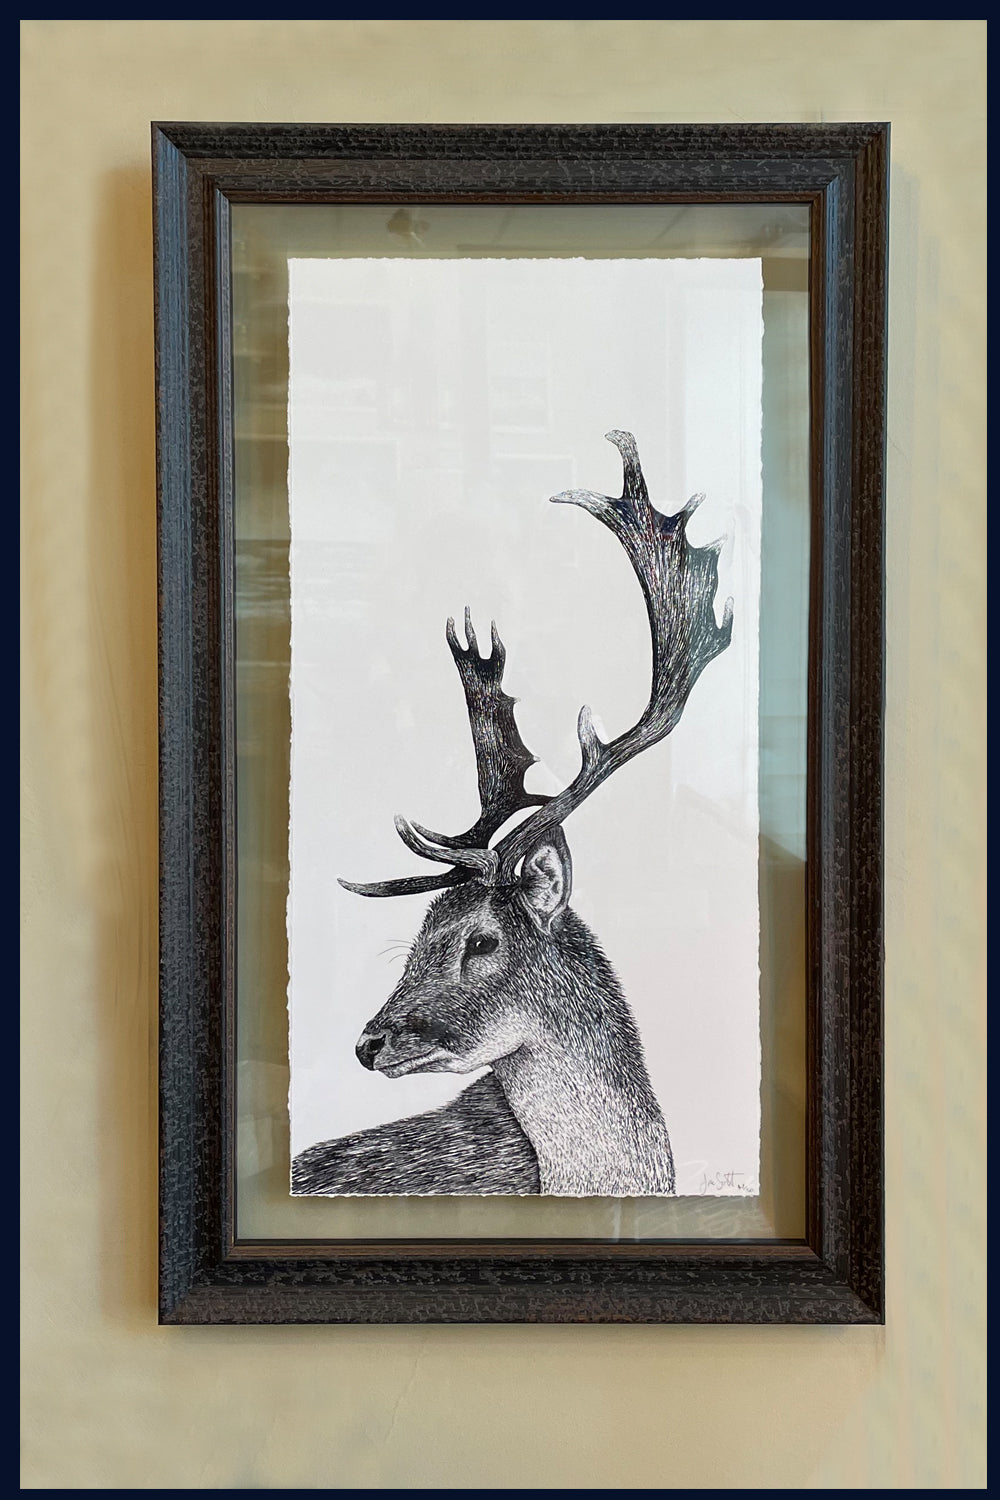 Stag, Norfolk. Pen and Ink artwork by Jac Scott